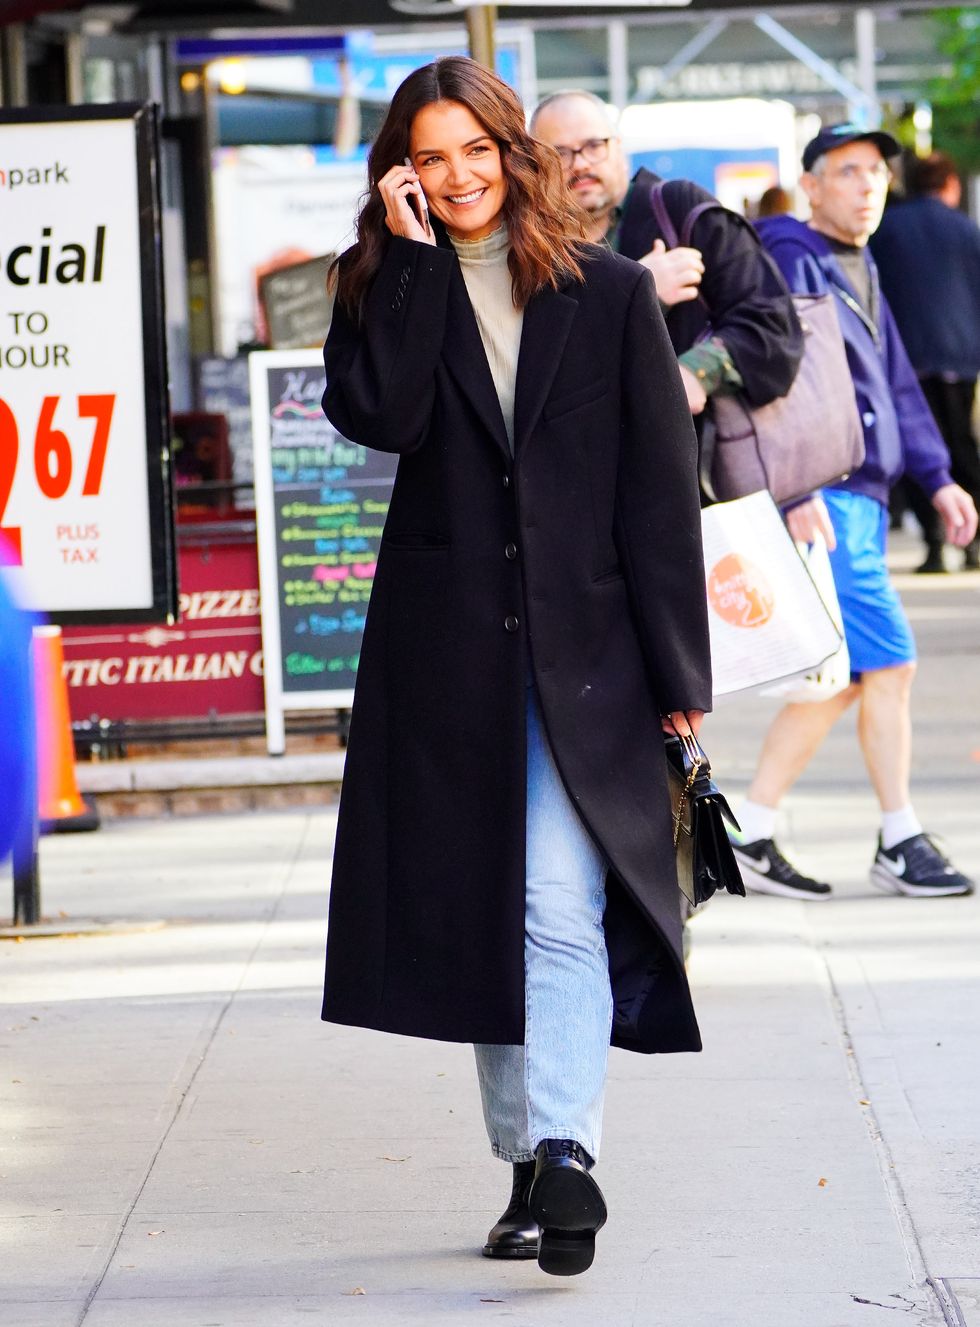 katie-holmes-walks-and-talks-on-her-cell-phone-on-october-news-photo-1572380158